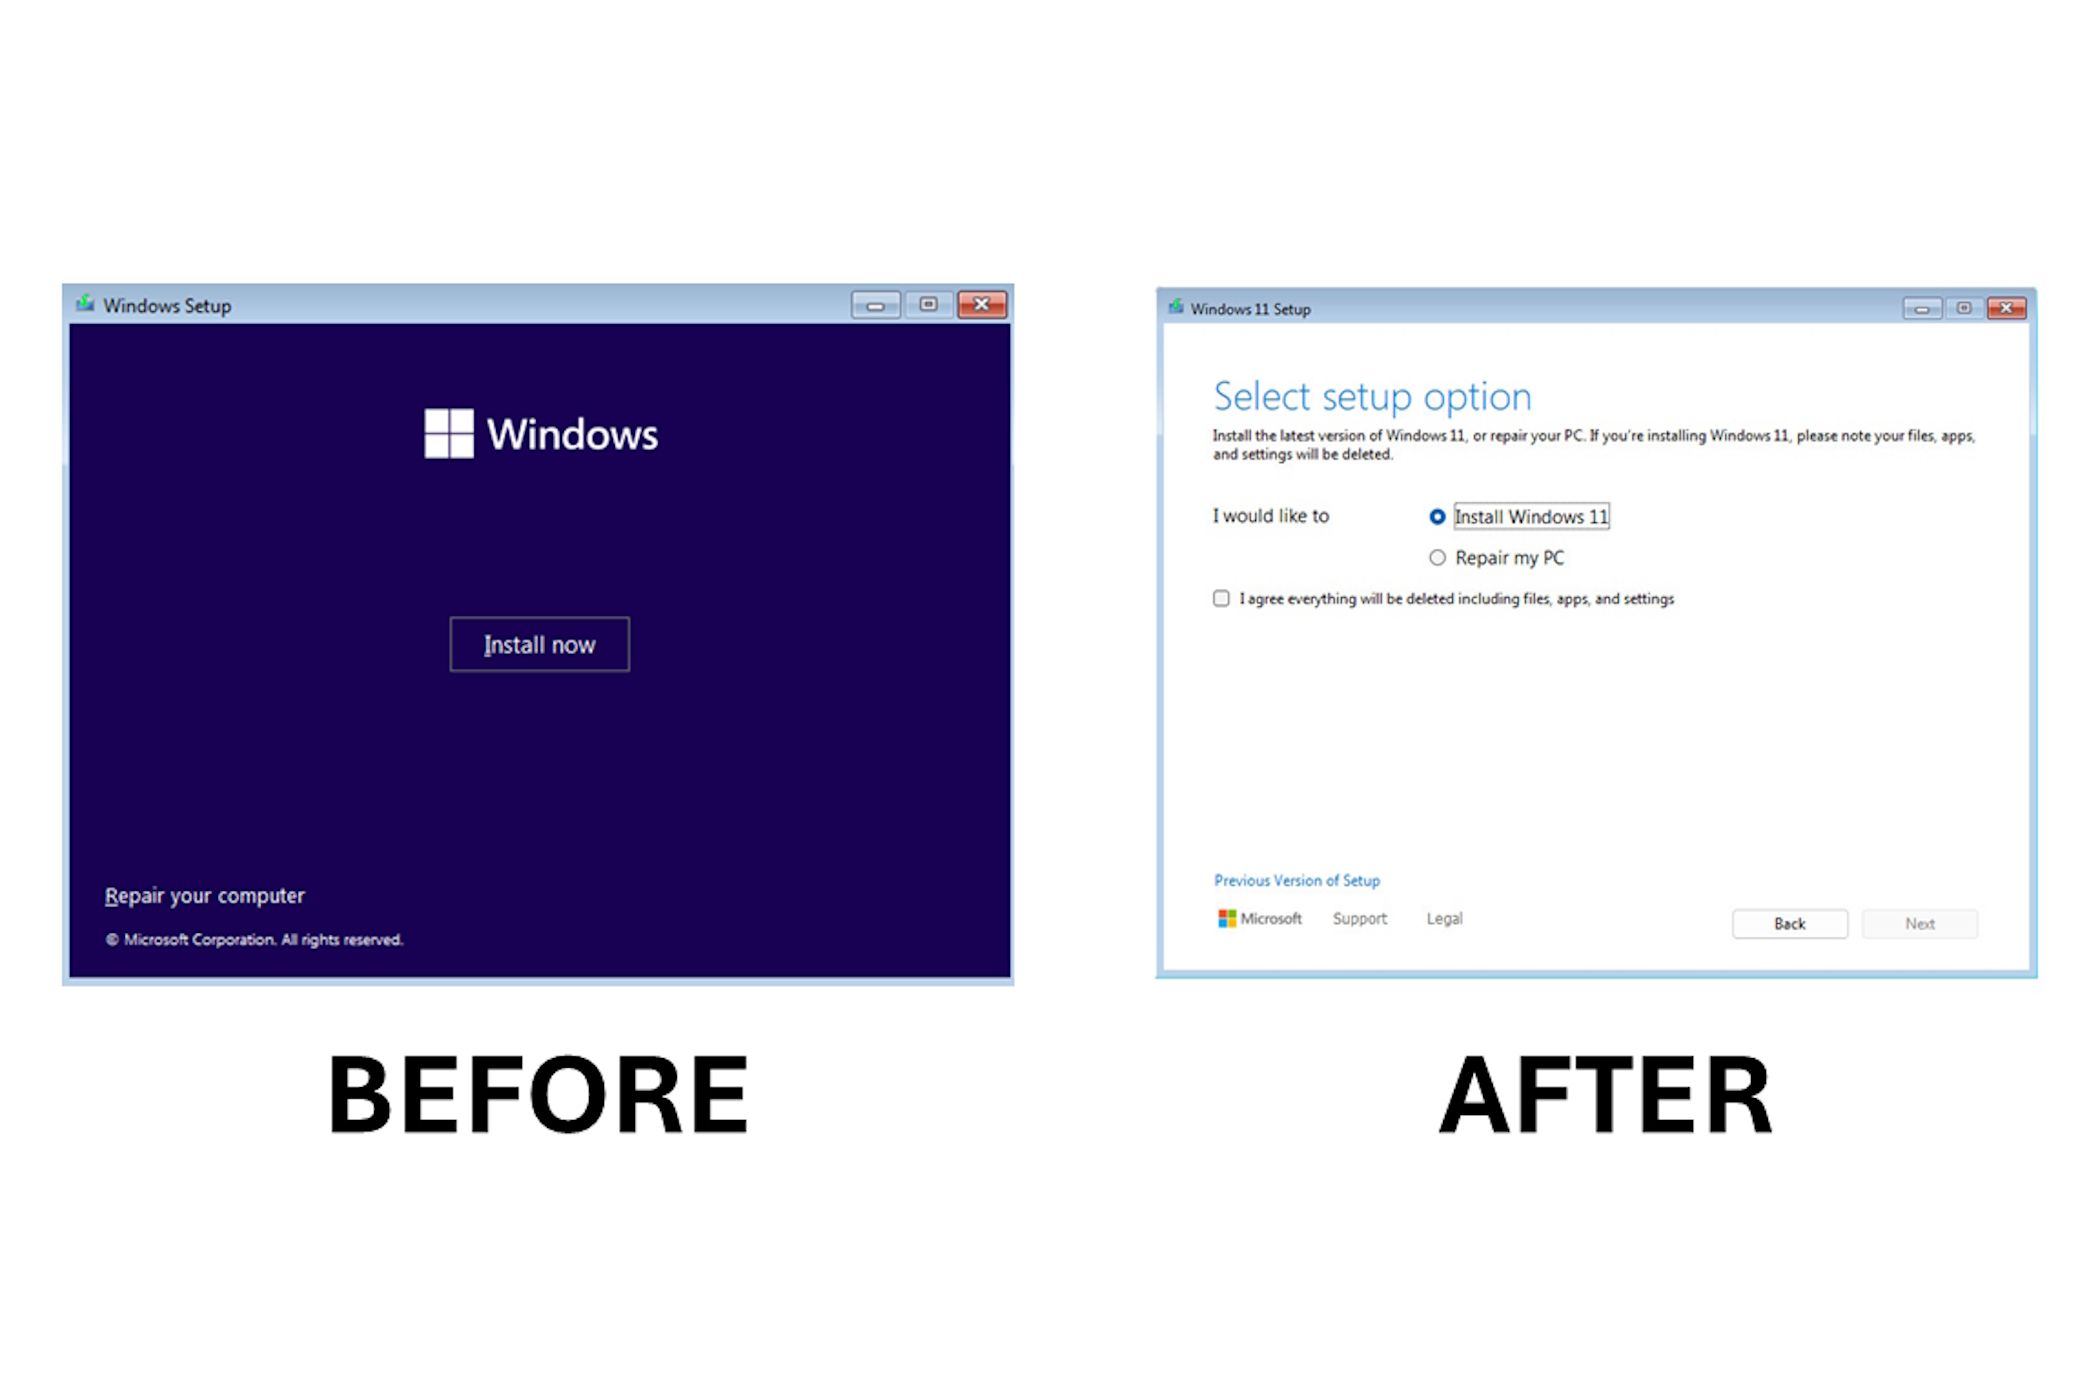 The Windows setup before and after